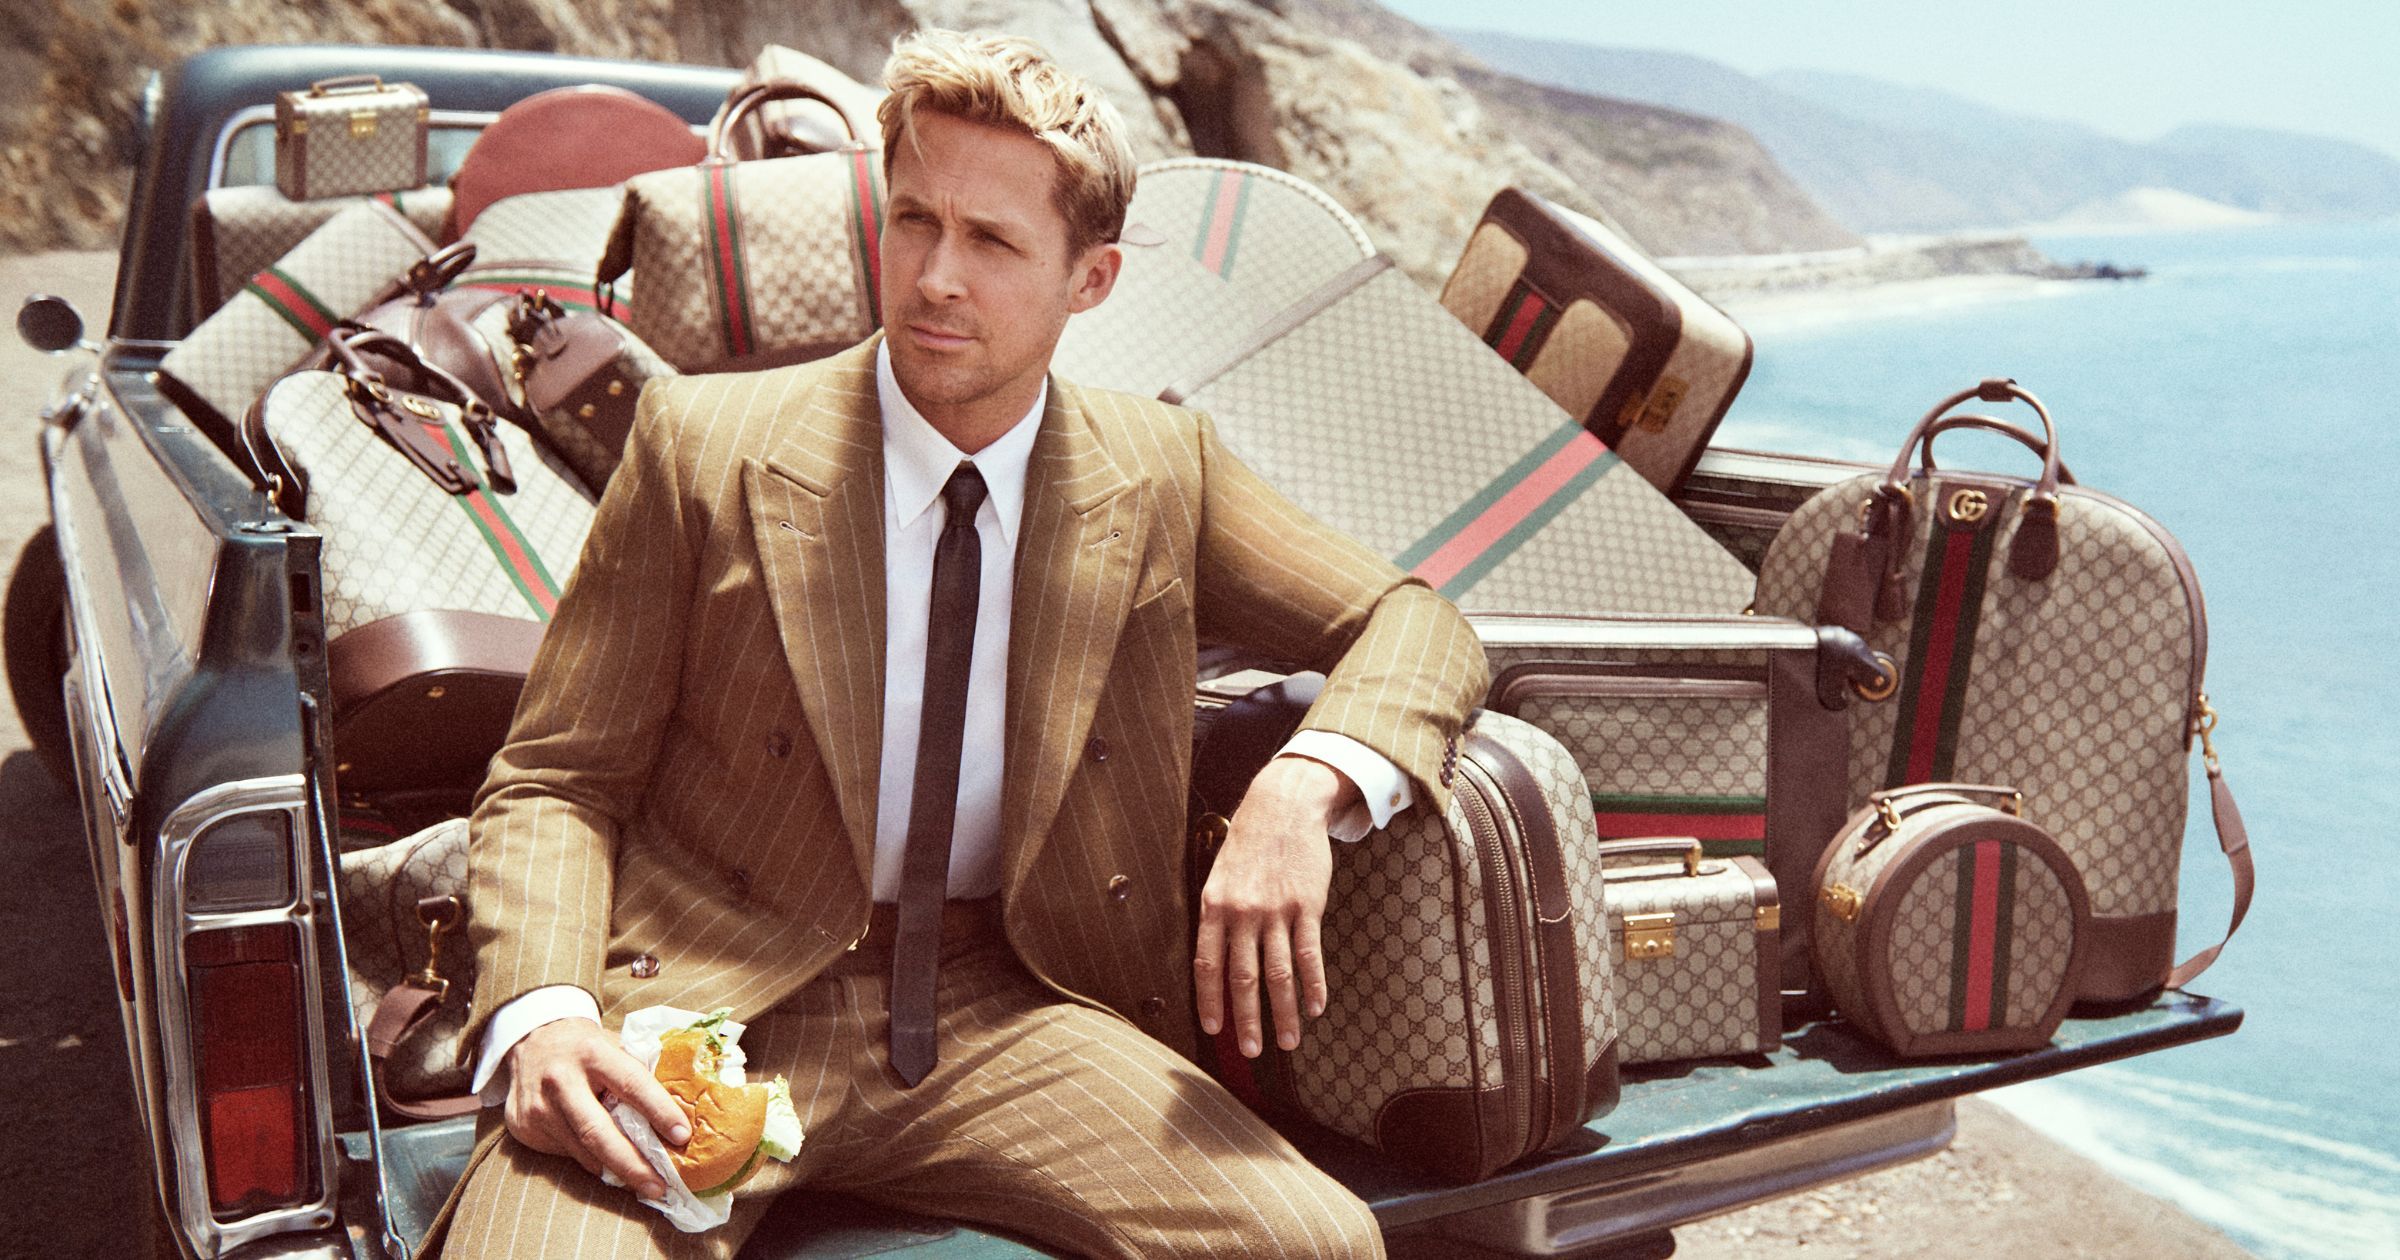 Gucci Valigeria sparks our wanderlust with a little help from Ryan Gosling